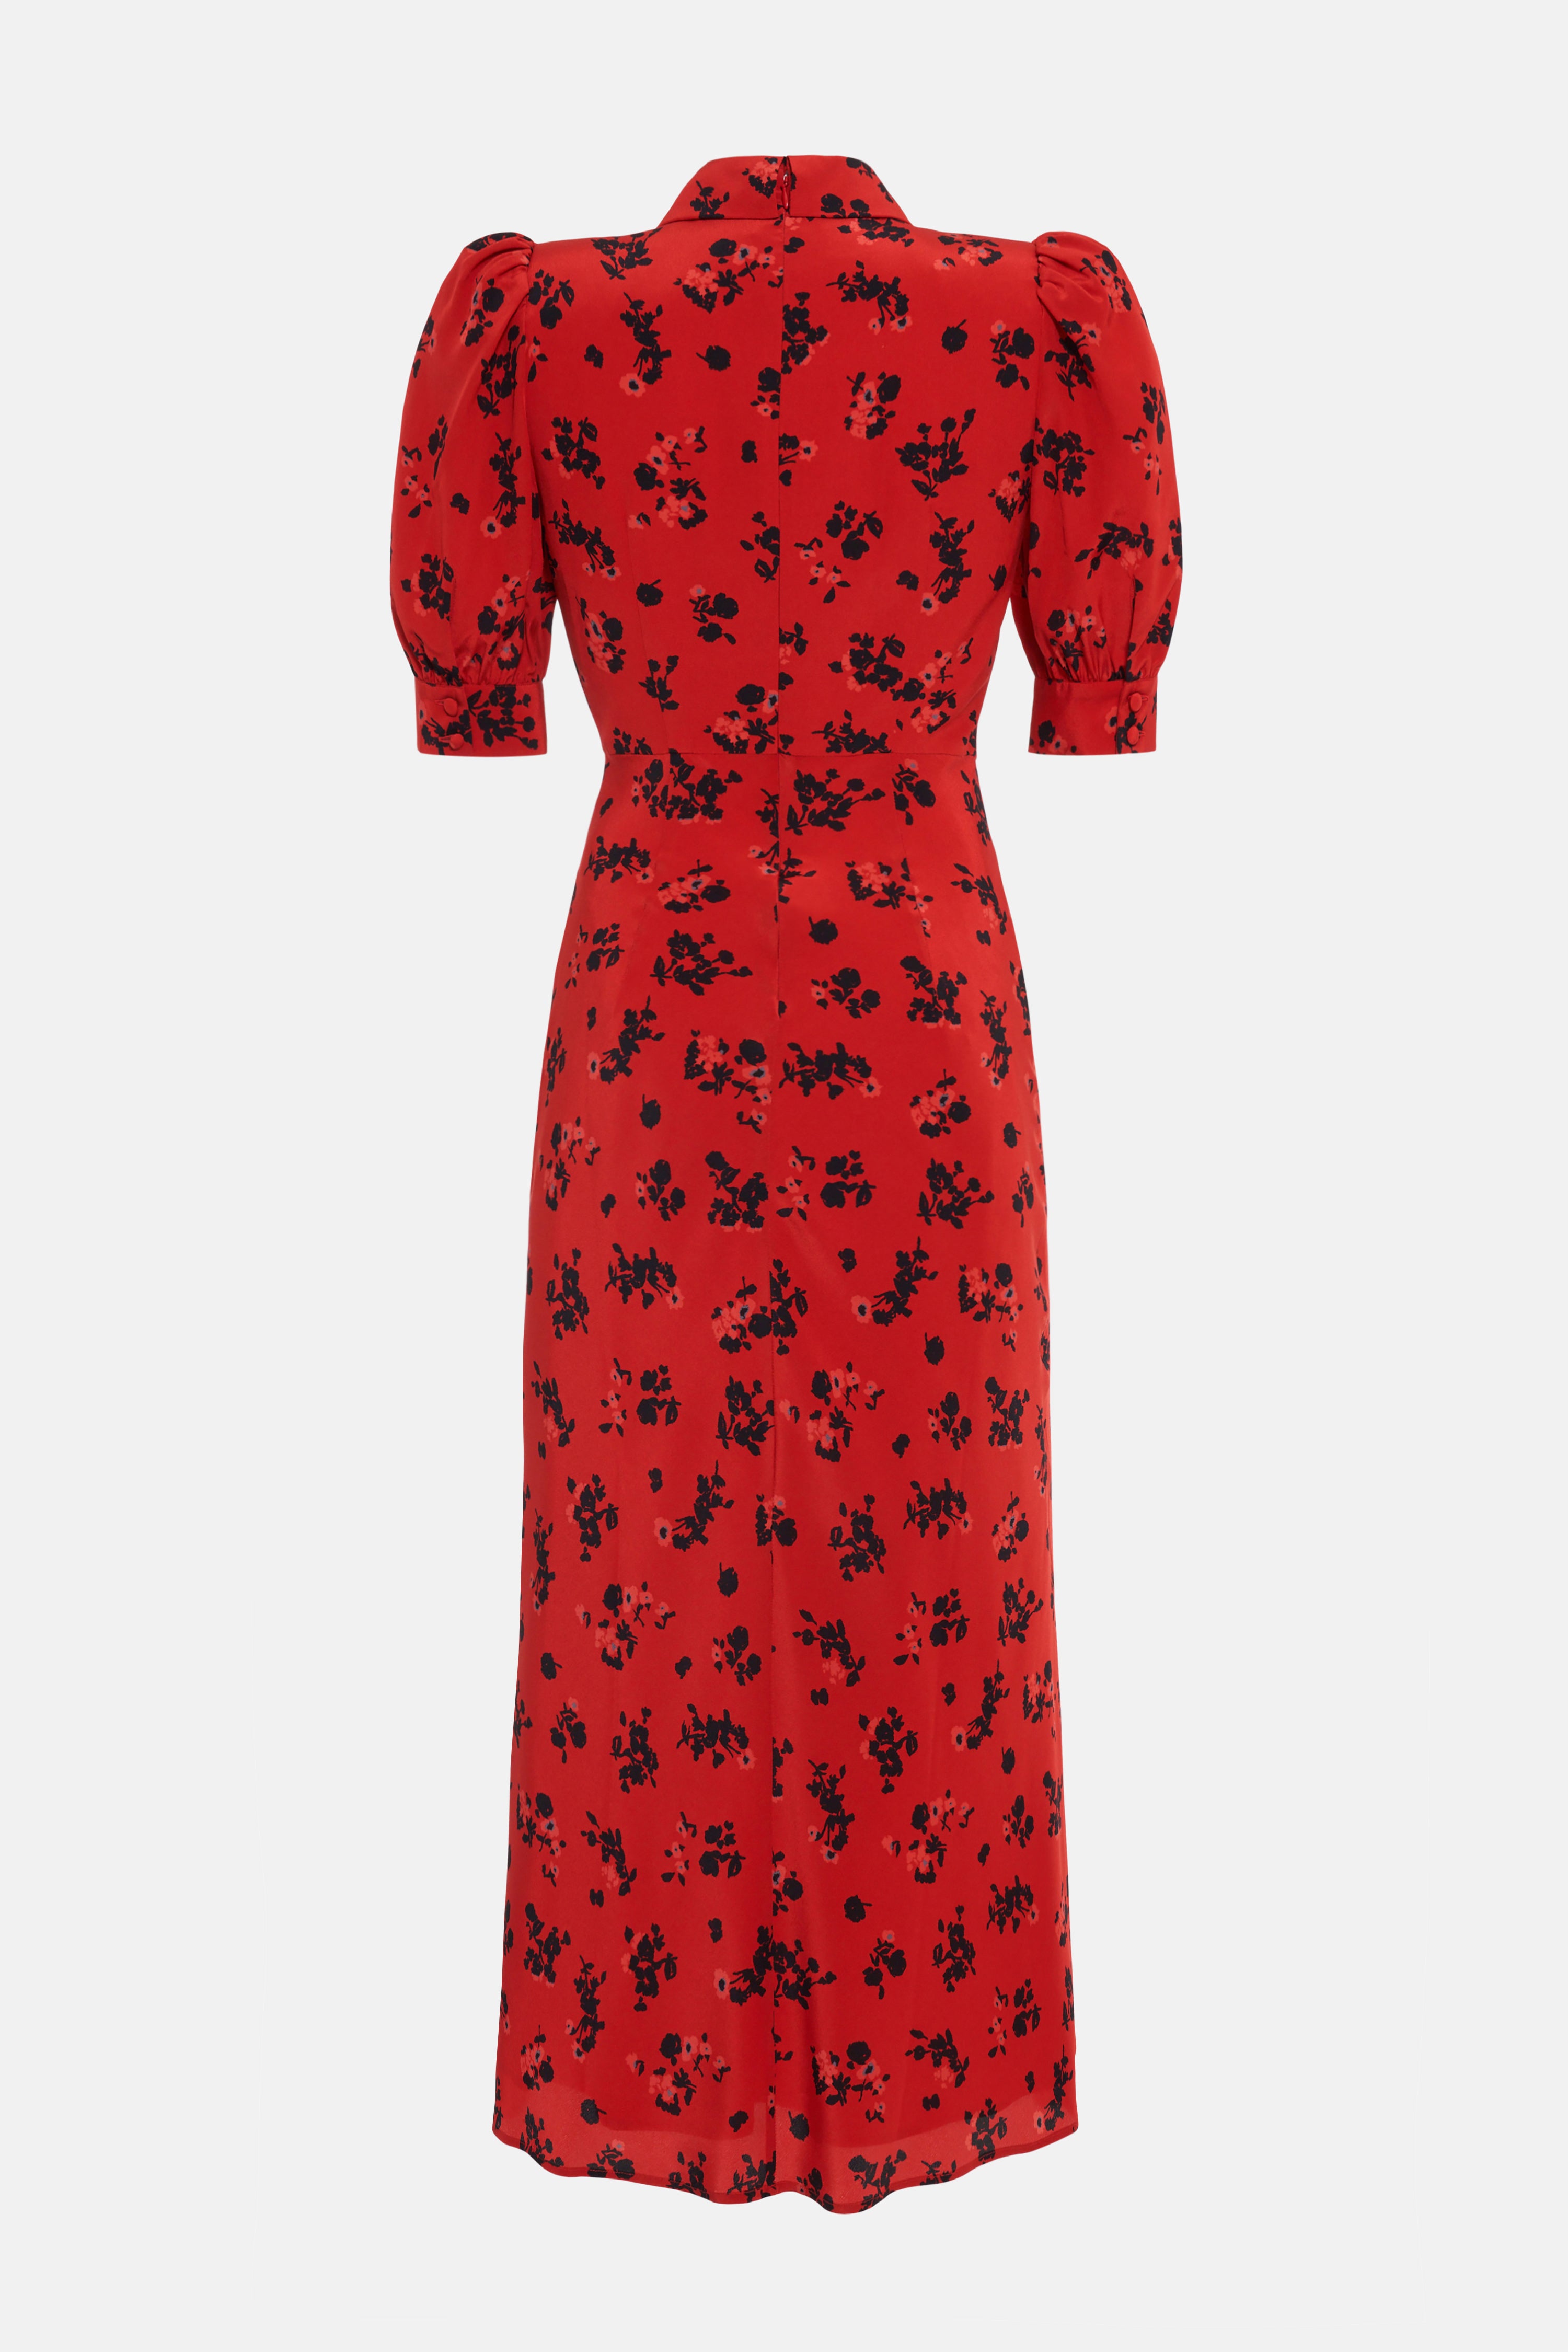 ROSE PRINT SILK DRESS WITH COLLAR AND BUTTONS